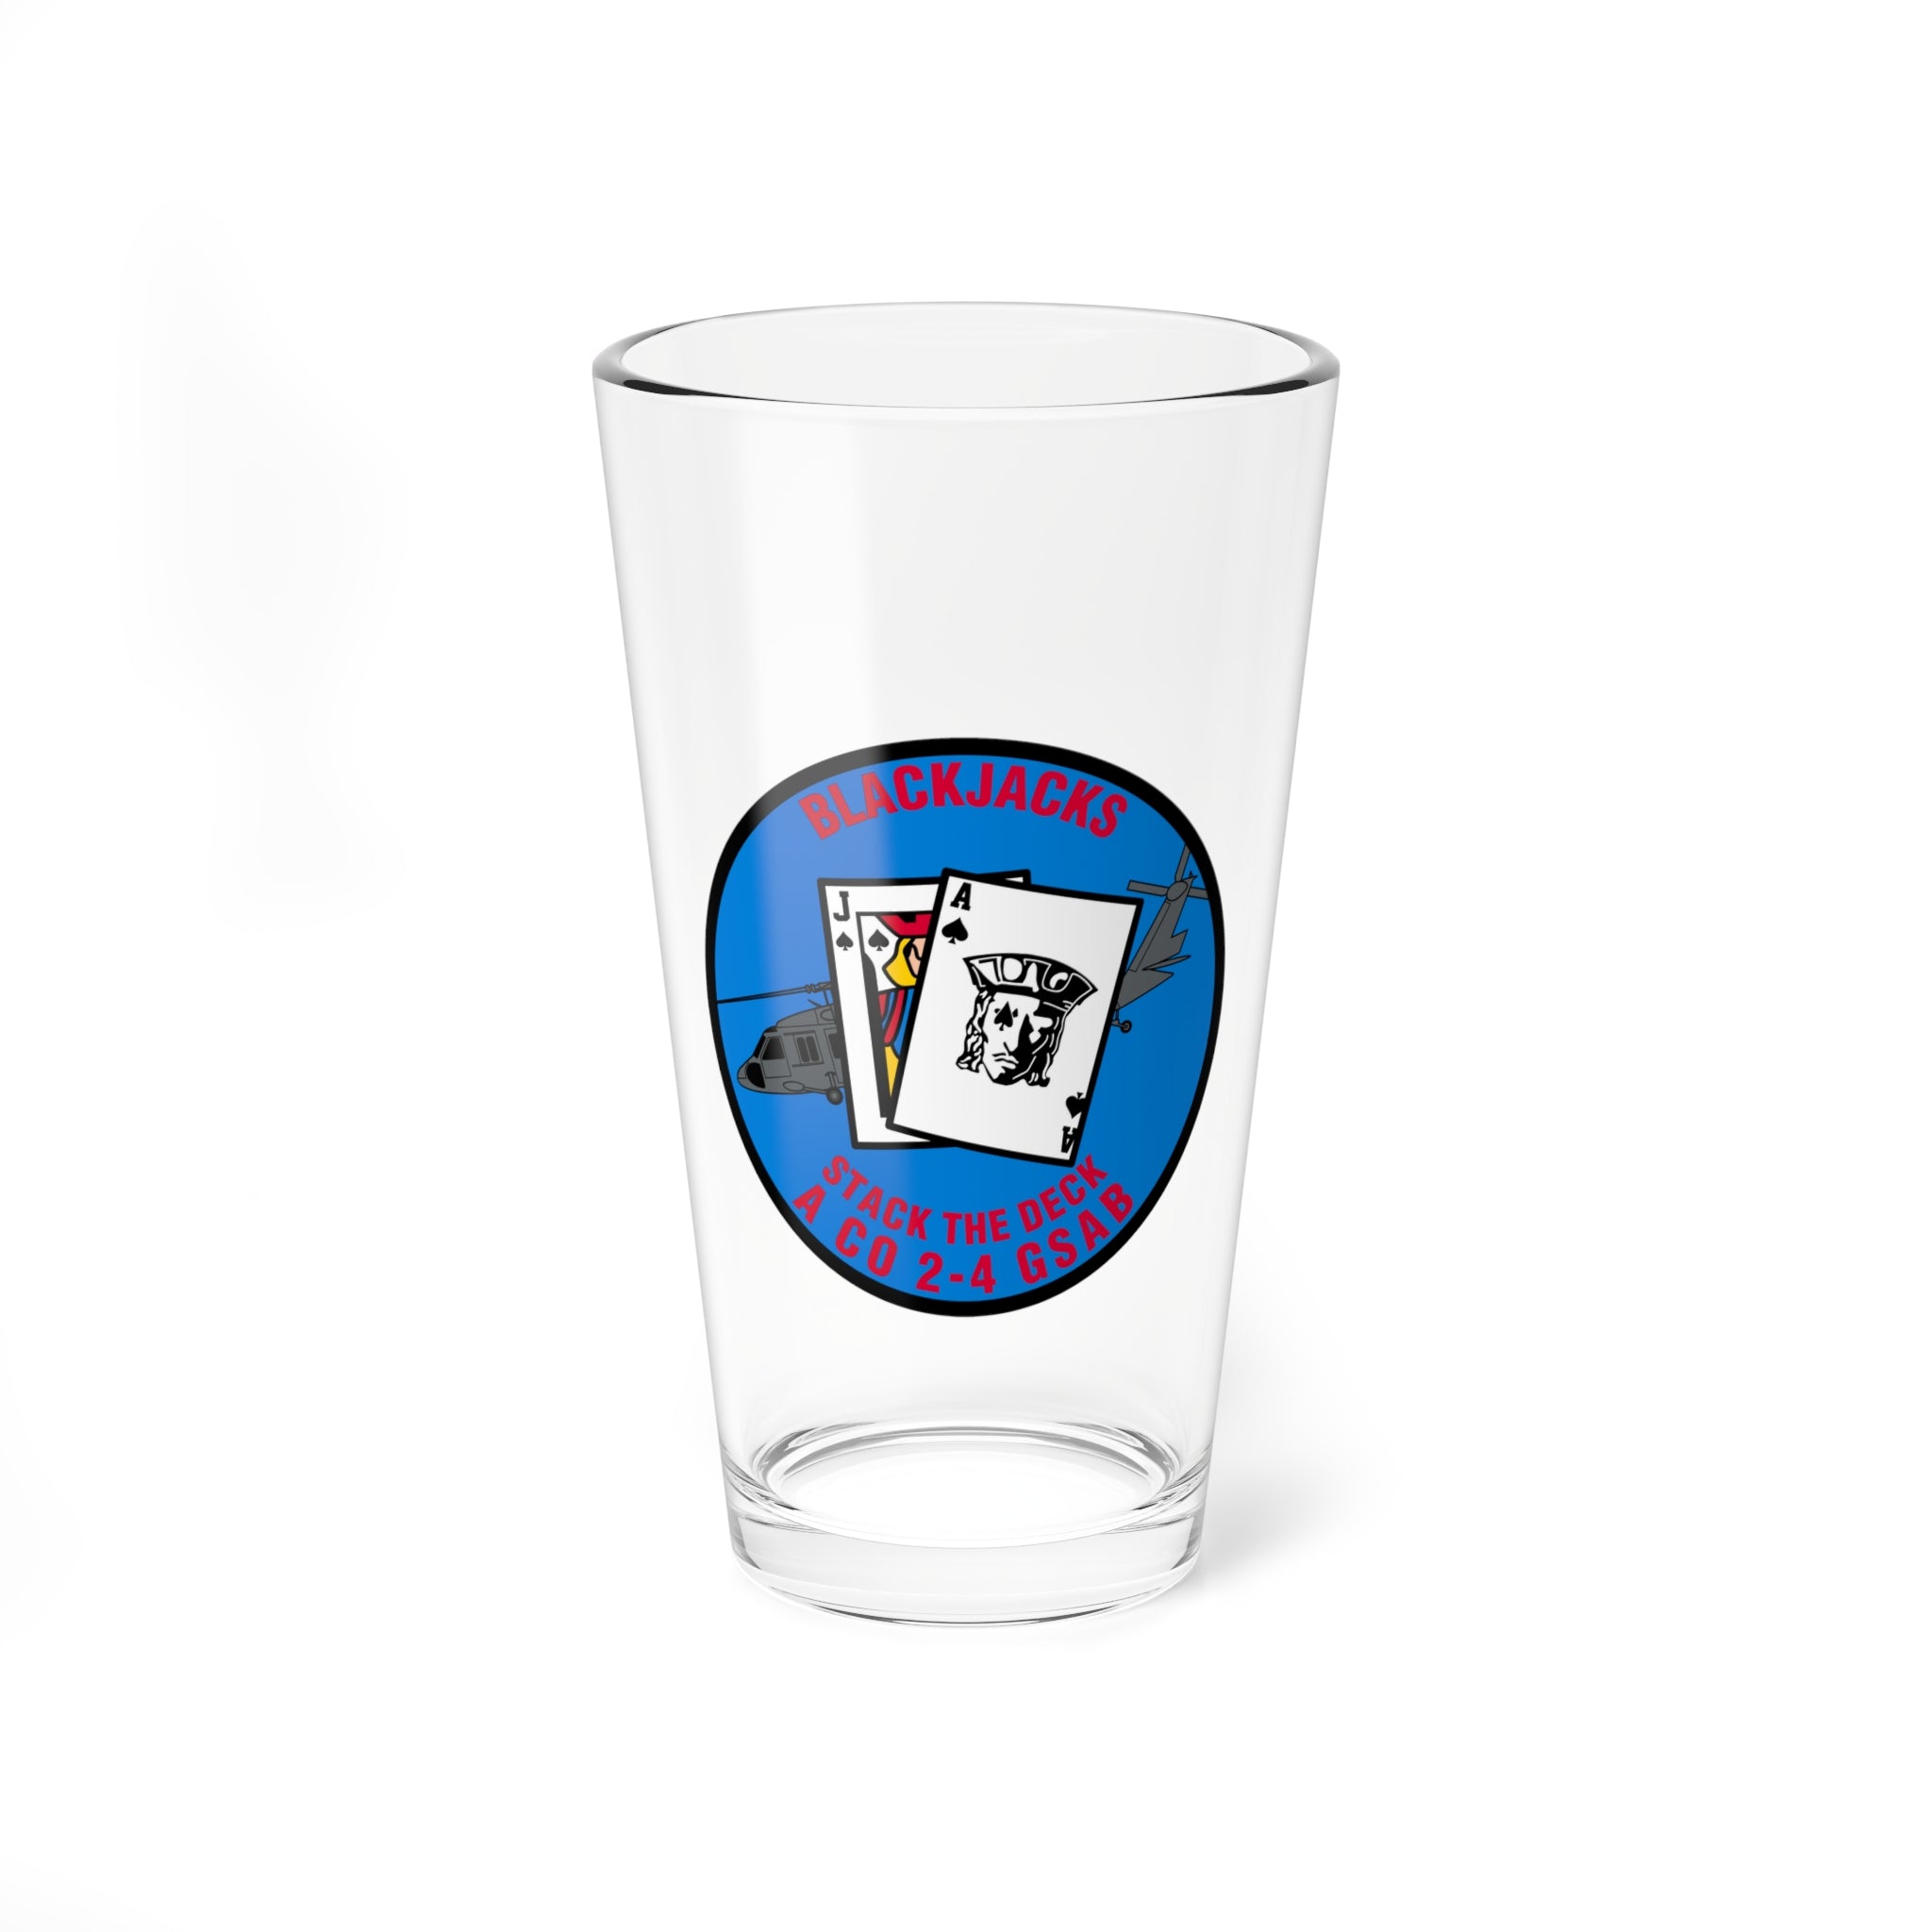 A C0 2-4 GSAB -No Wings- Pint Glass, Navy All Weather FIghter Squadron